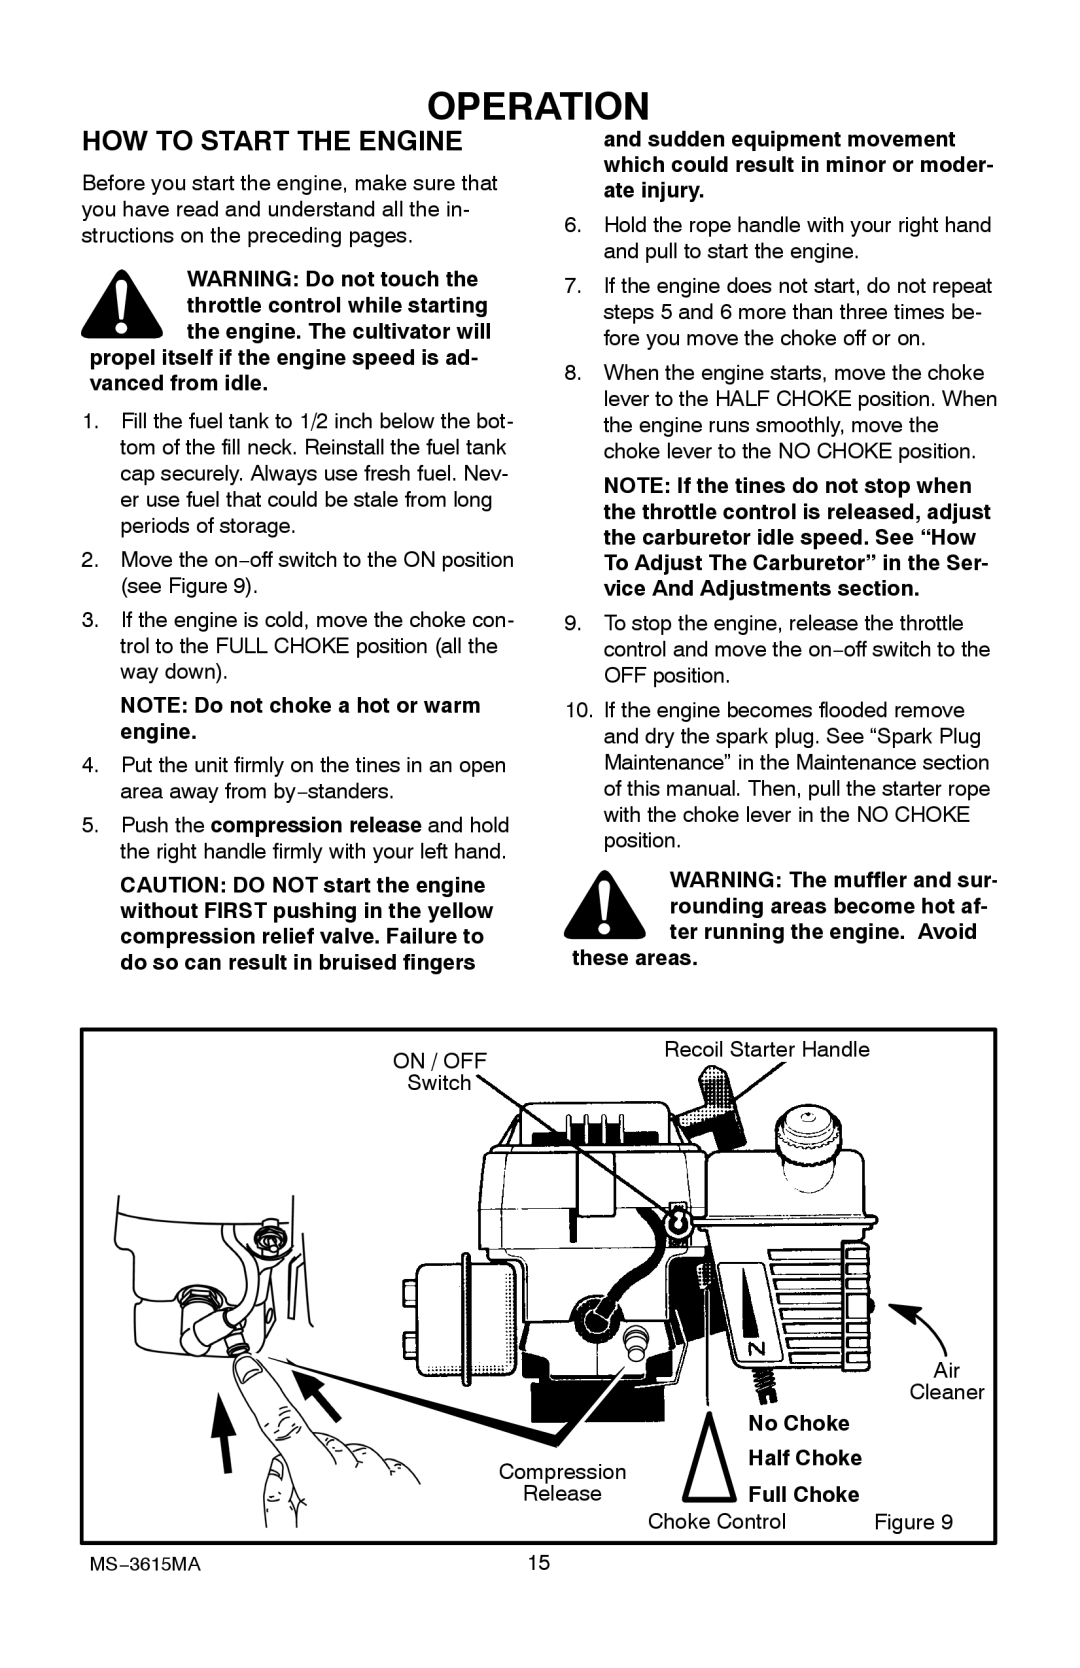 Husqvarna CT20 manual Operation, How To Start The Engine, NOTE Do not choke a hot or warm engine, these areas, No Choke 